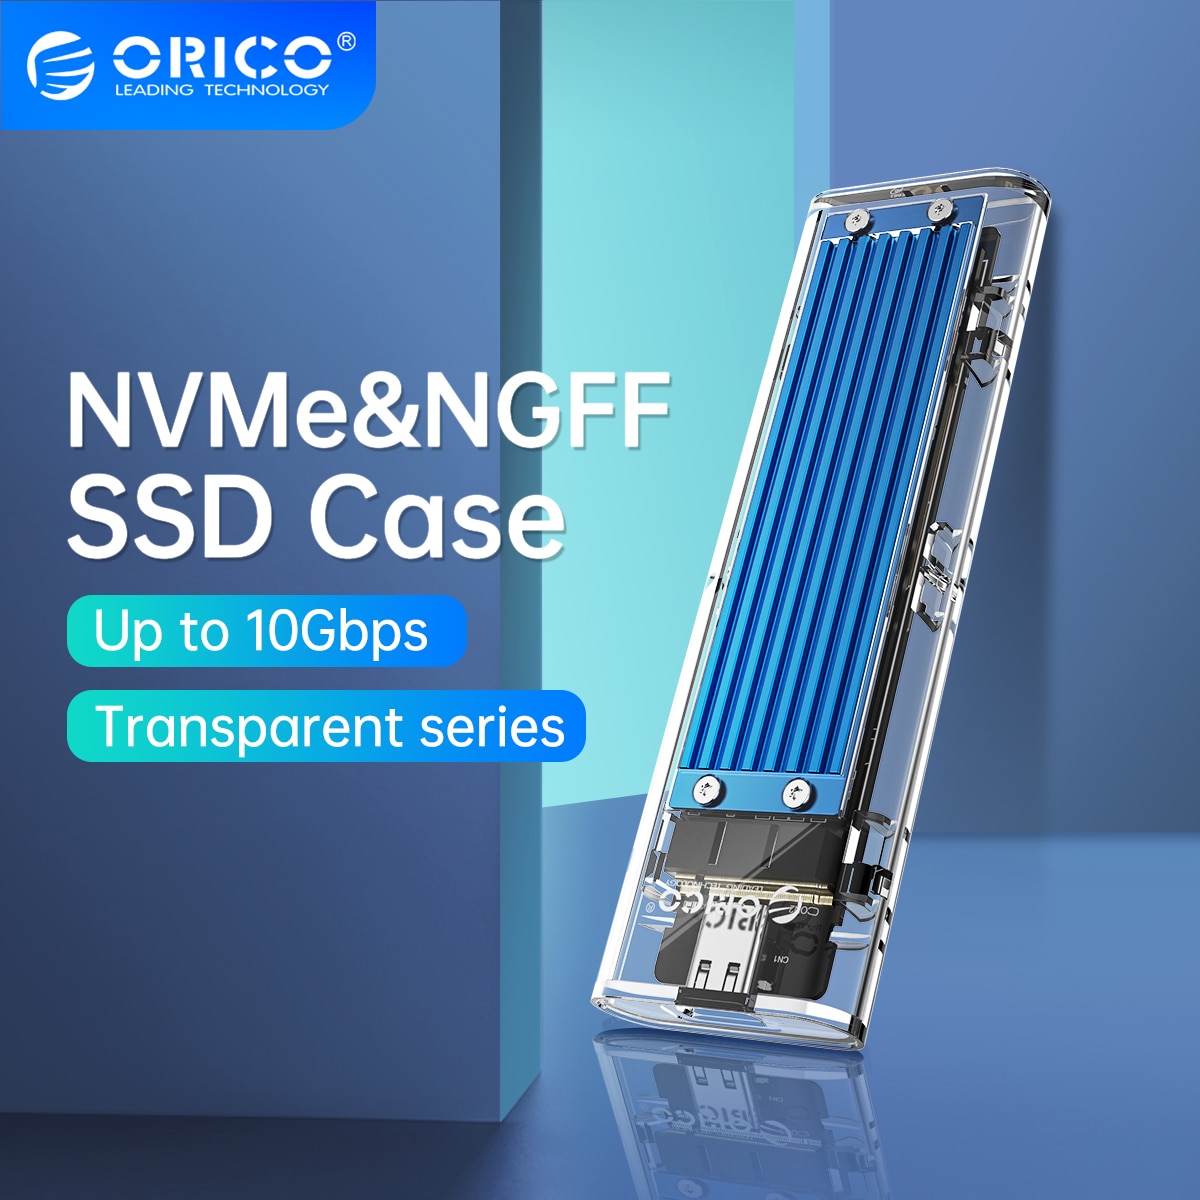 Orico M2 Ssd Case Nvme Ngff Dual Protocol Usb31 Gen2 10gbps Ssd Enclosure For Nvme Pcie M Key 4133